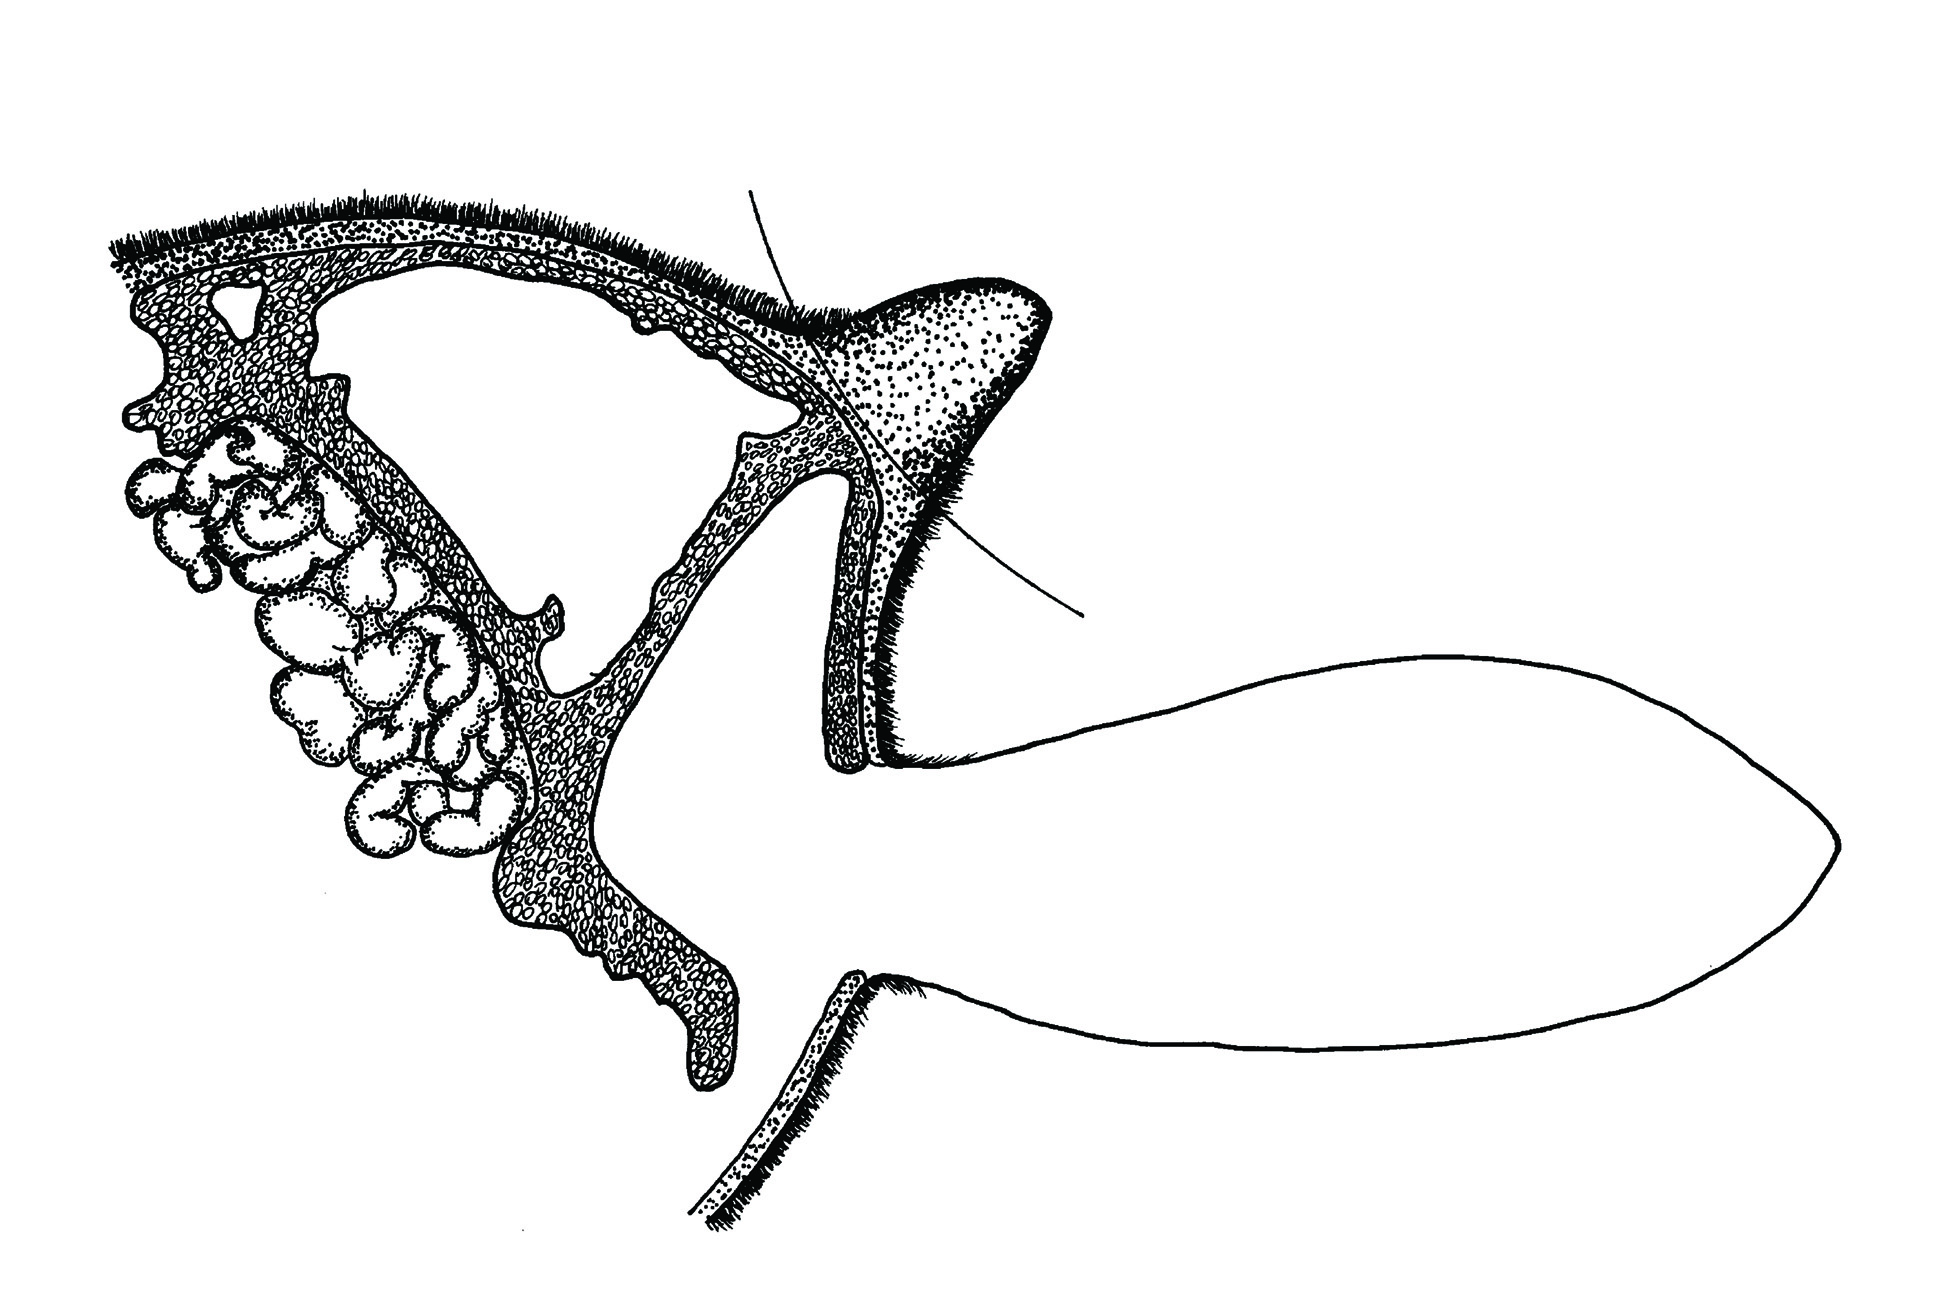 Graphic of the horn and ear of a calf showing where the dehorner should cut